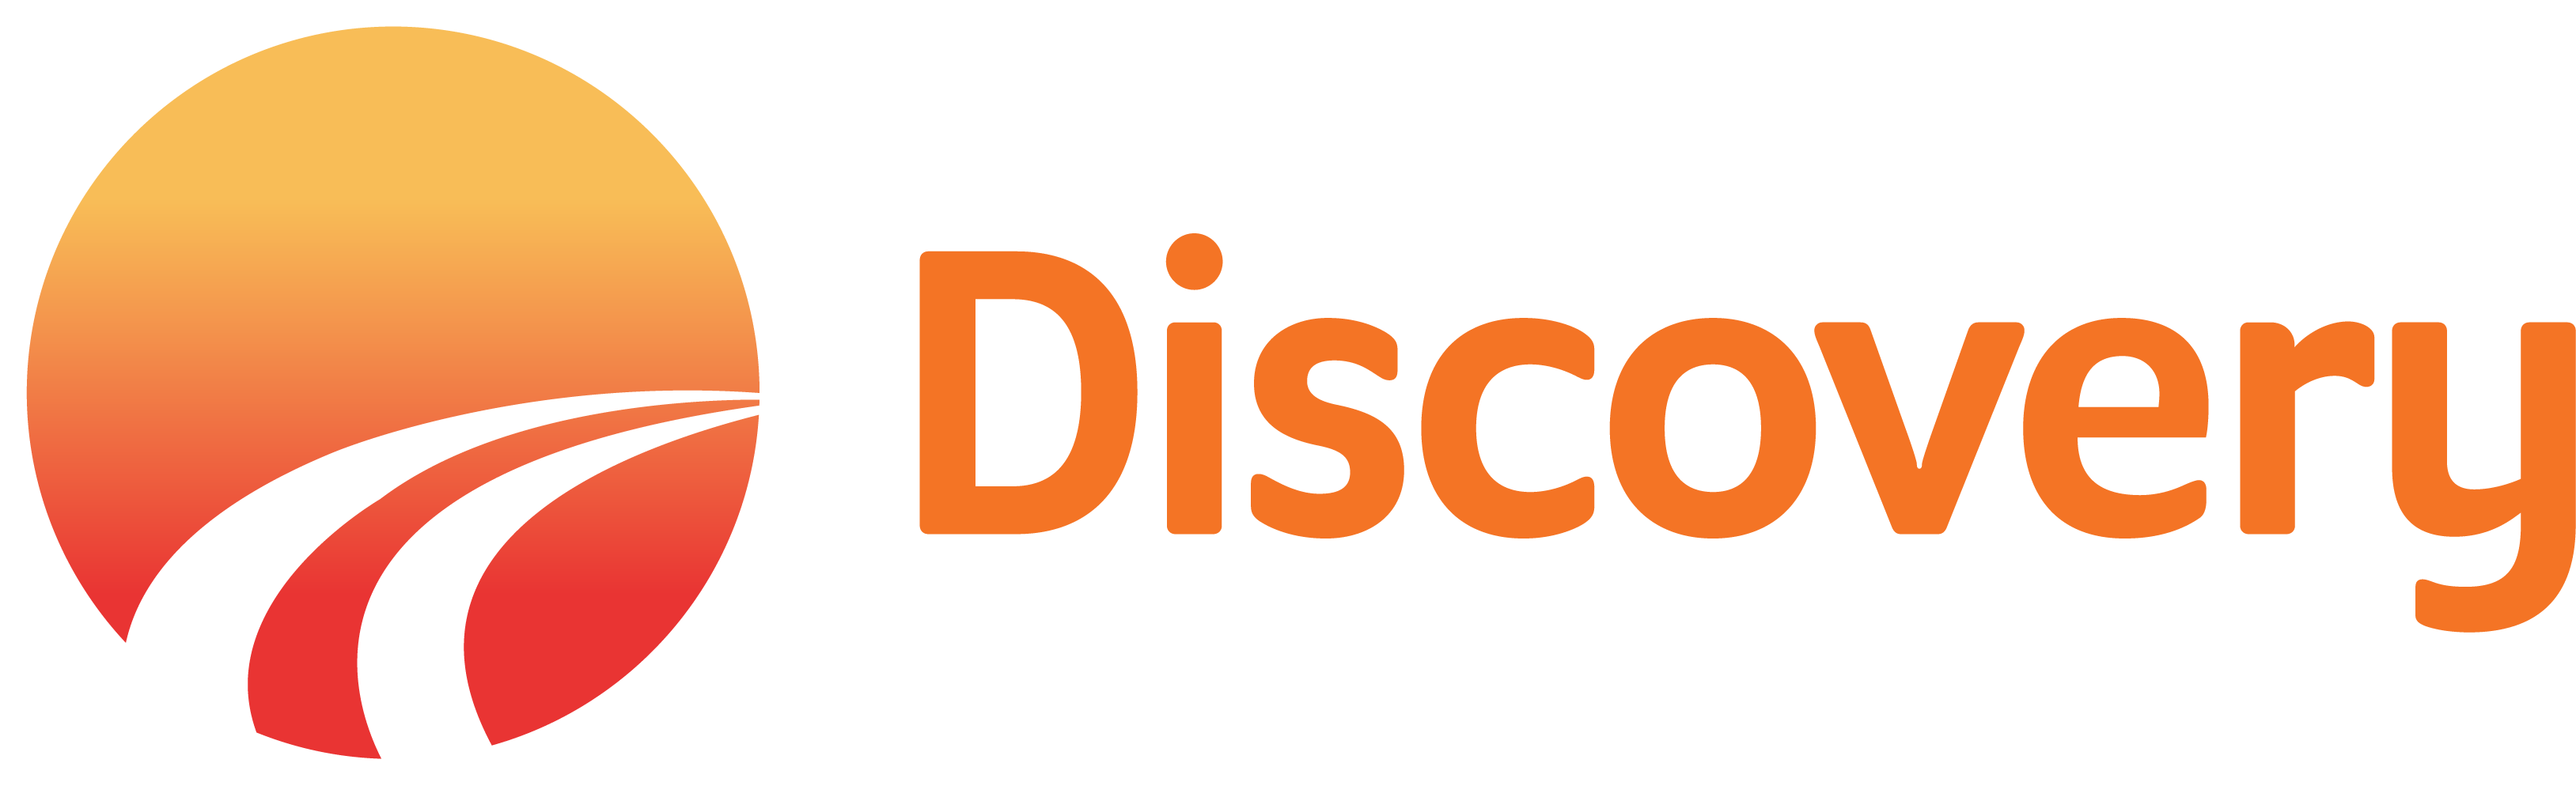 Discovery LS RGB